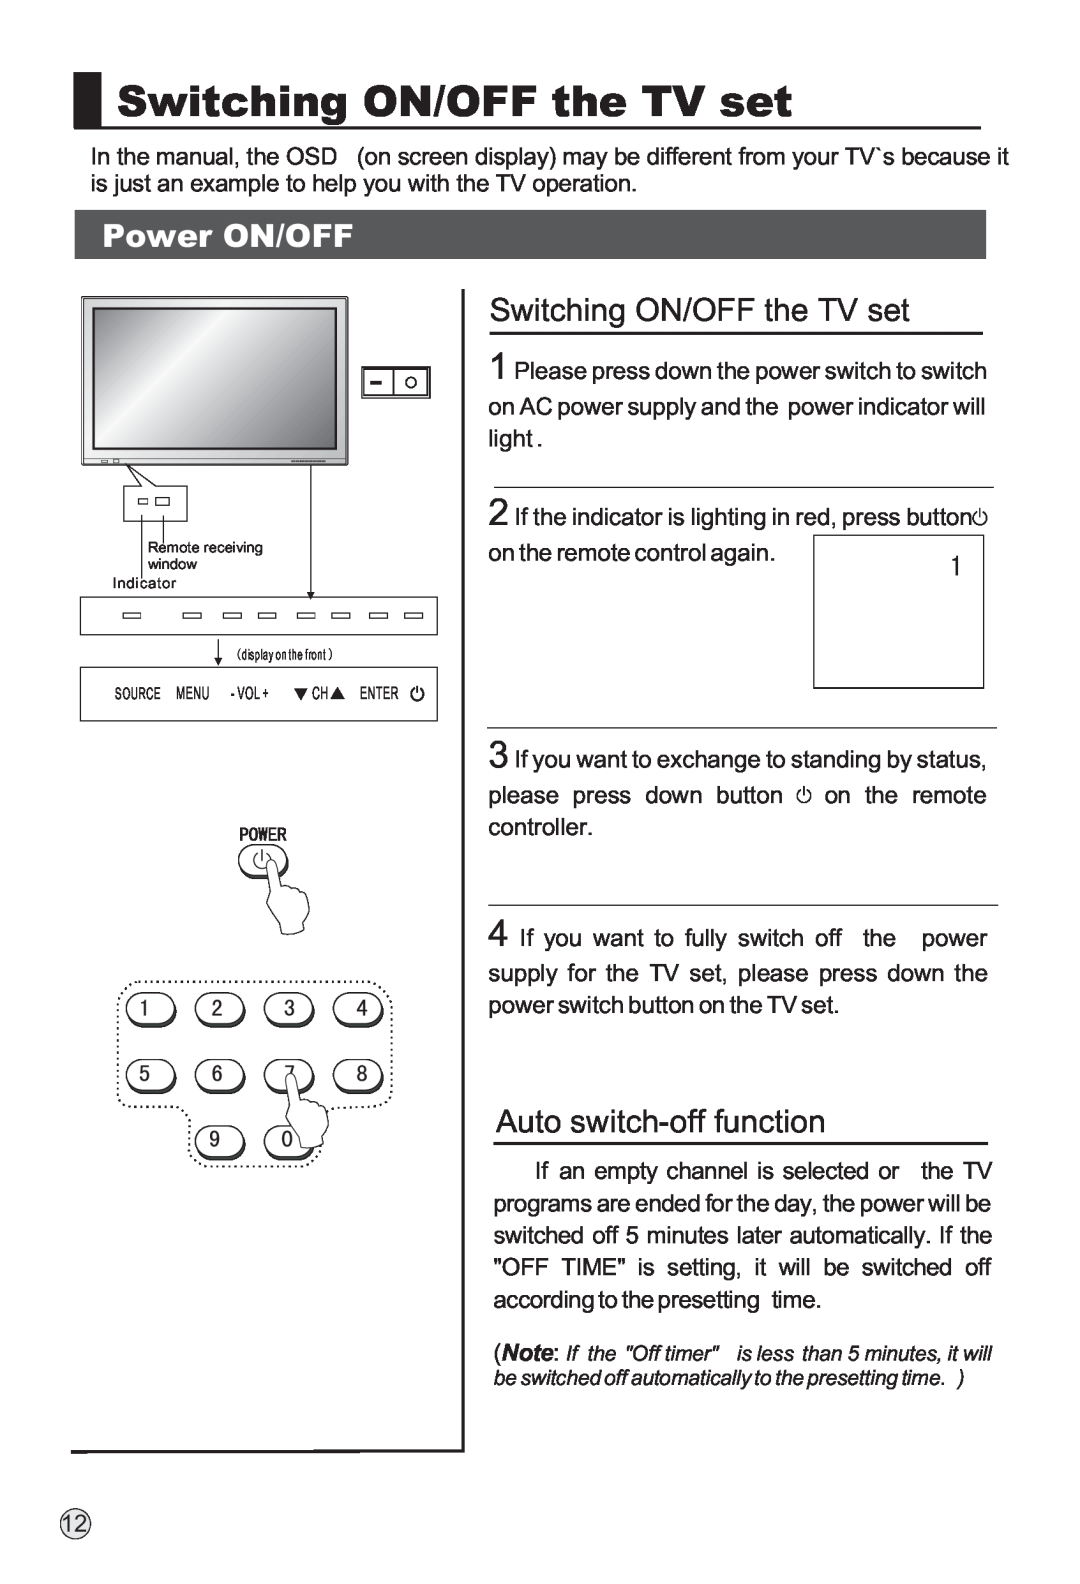 Haier P42SV6-C1 owner manual Switching ON/OFF the TV set, Power ON/OFF, Auto switch-off function 